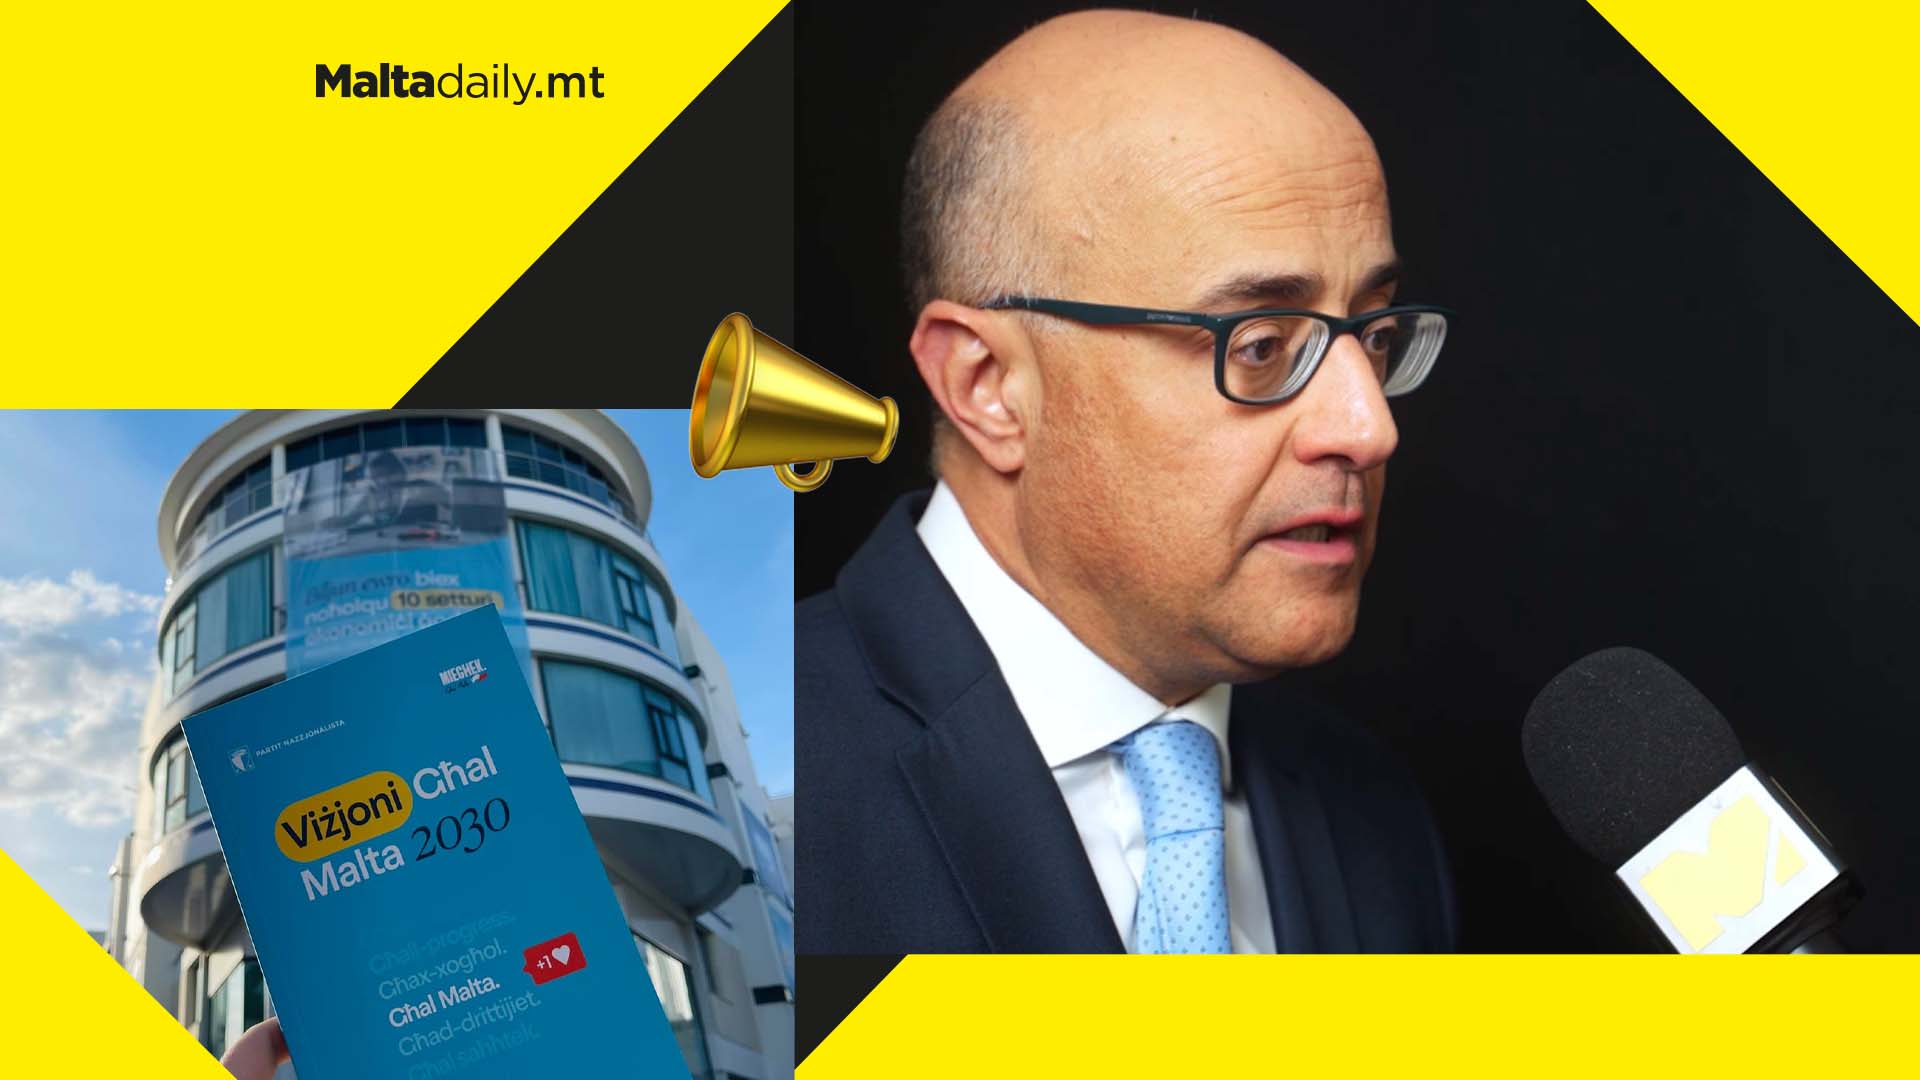 An electoral win is 'doable' for the Nationalist Party, says Jason Azzopardi